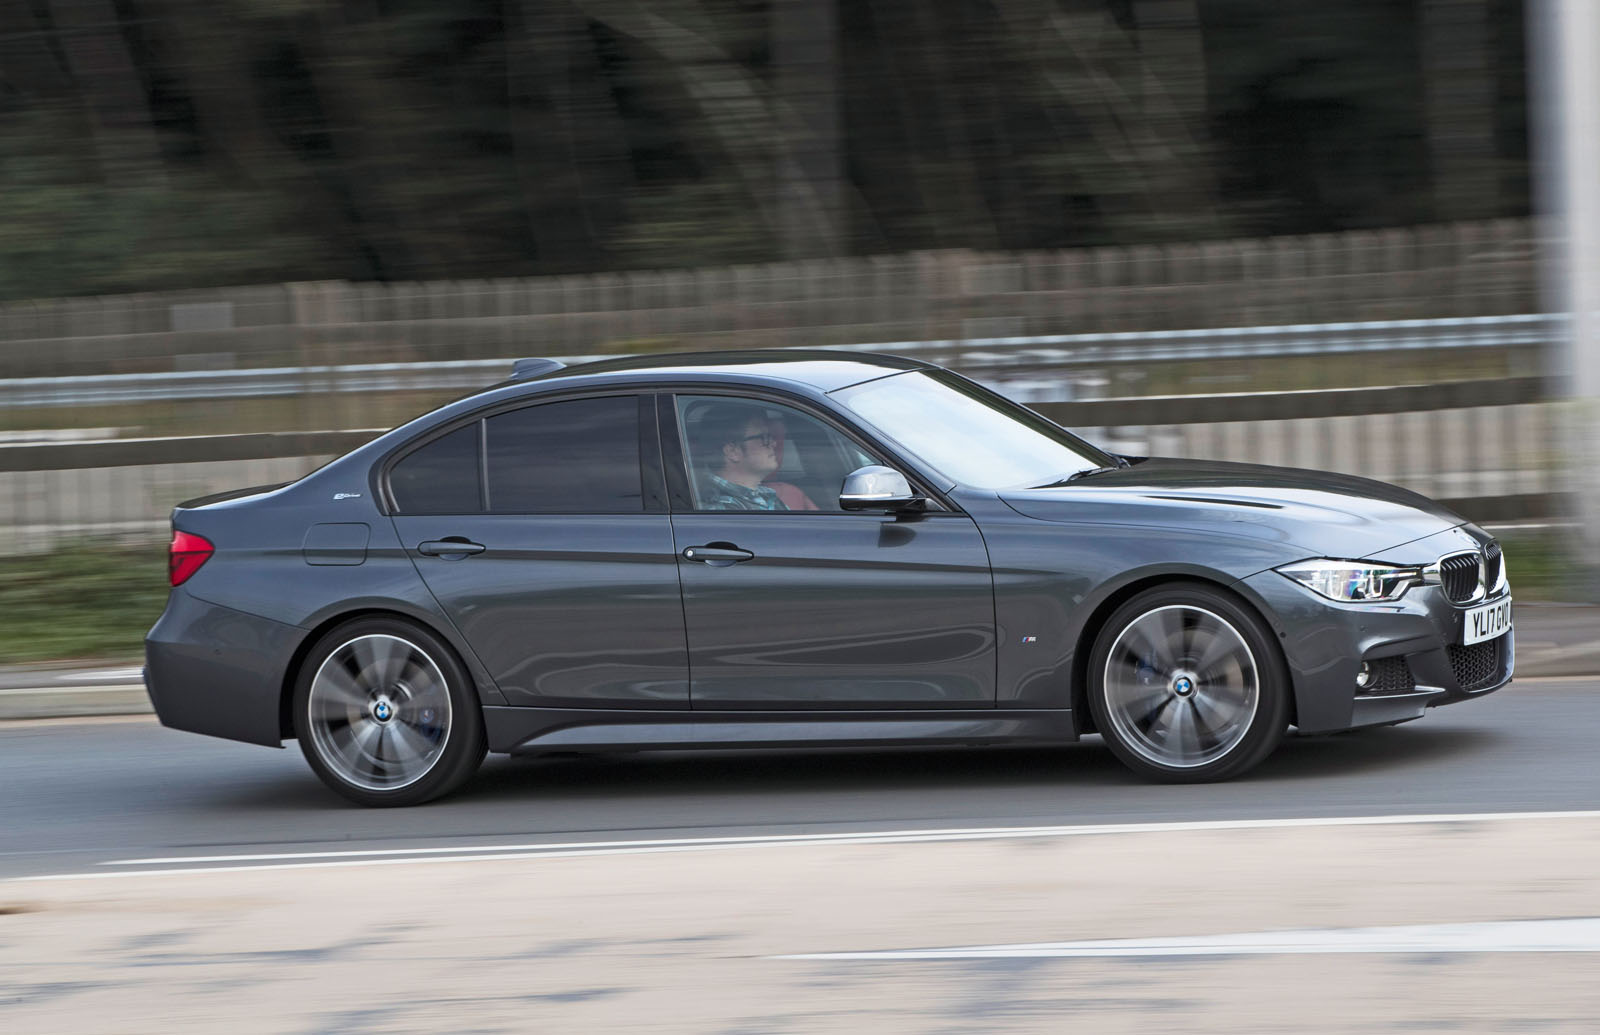 BMW 330e on the road